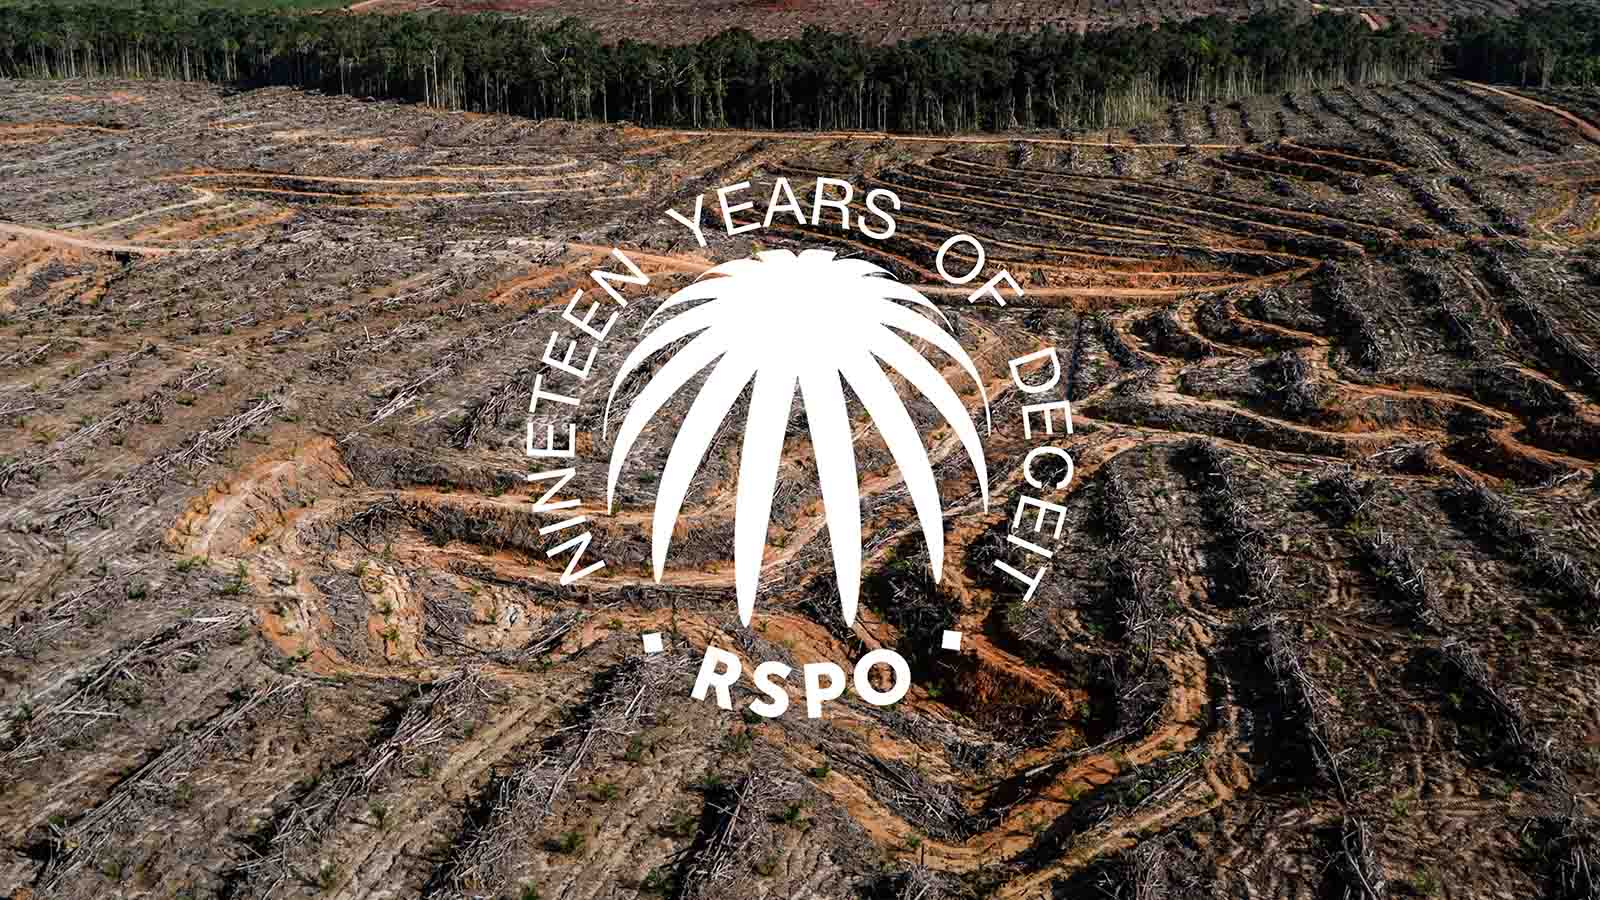 Palm plantation with overlay text "Nineteen Years of Deceit - RSPO"